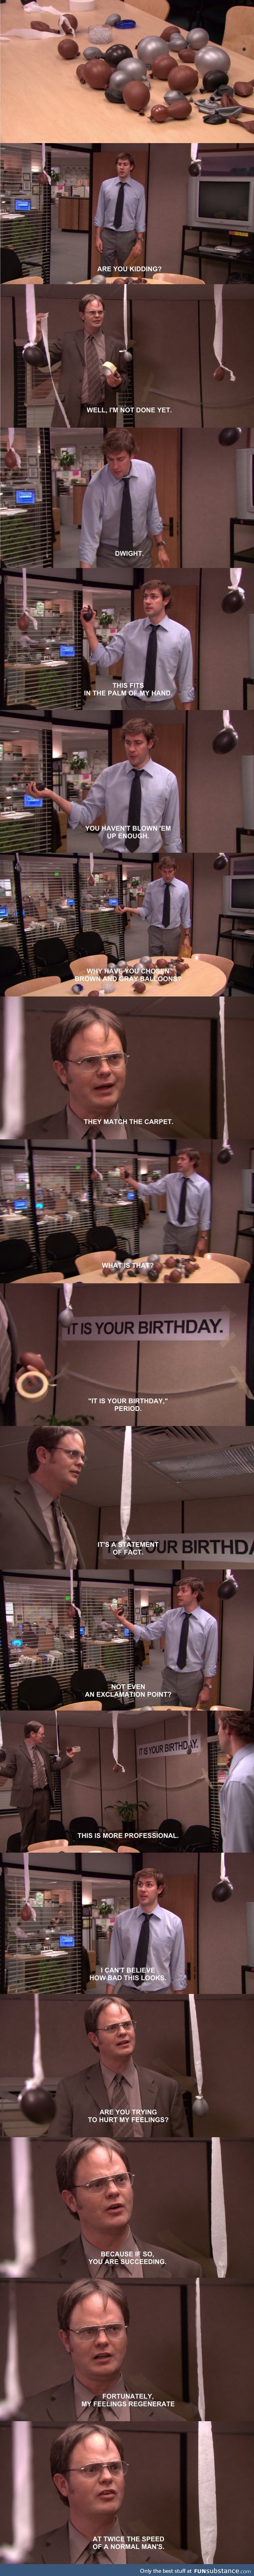 It is your birthday